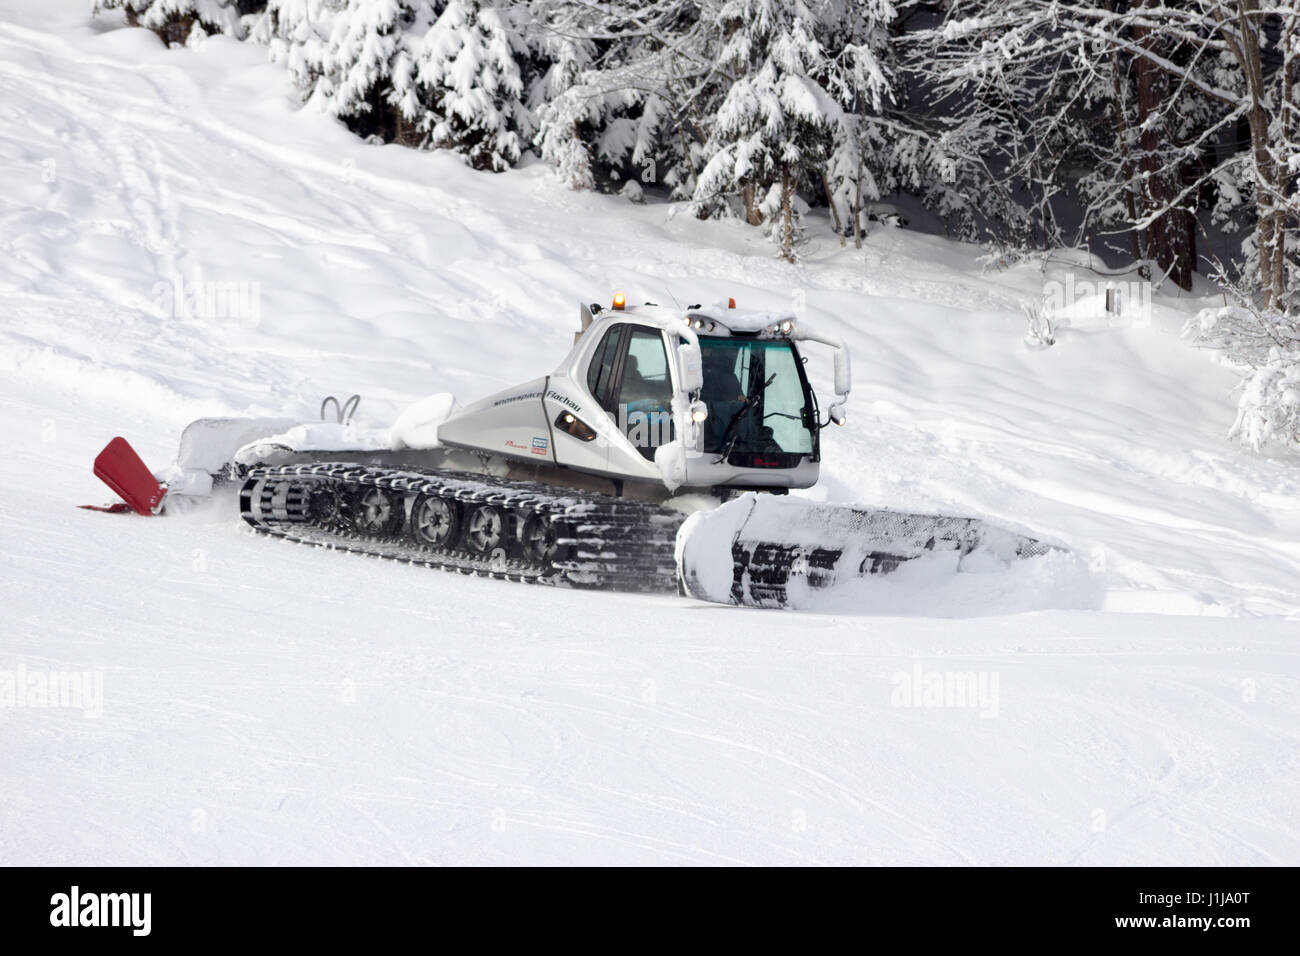 FLACHAU, AUSTRIA - JAN 7, 2012: Snow groomer on a ski piste in the Austrian Alps. These pistes are part of the Ski Armad network, the largest of Europ Stock Photo